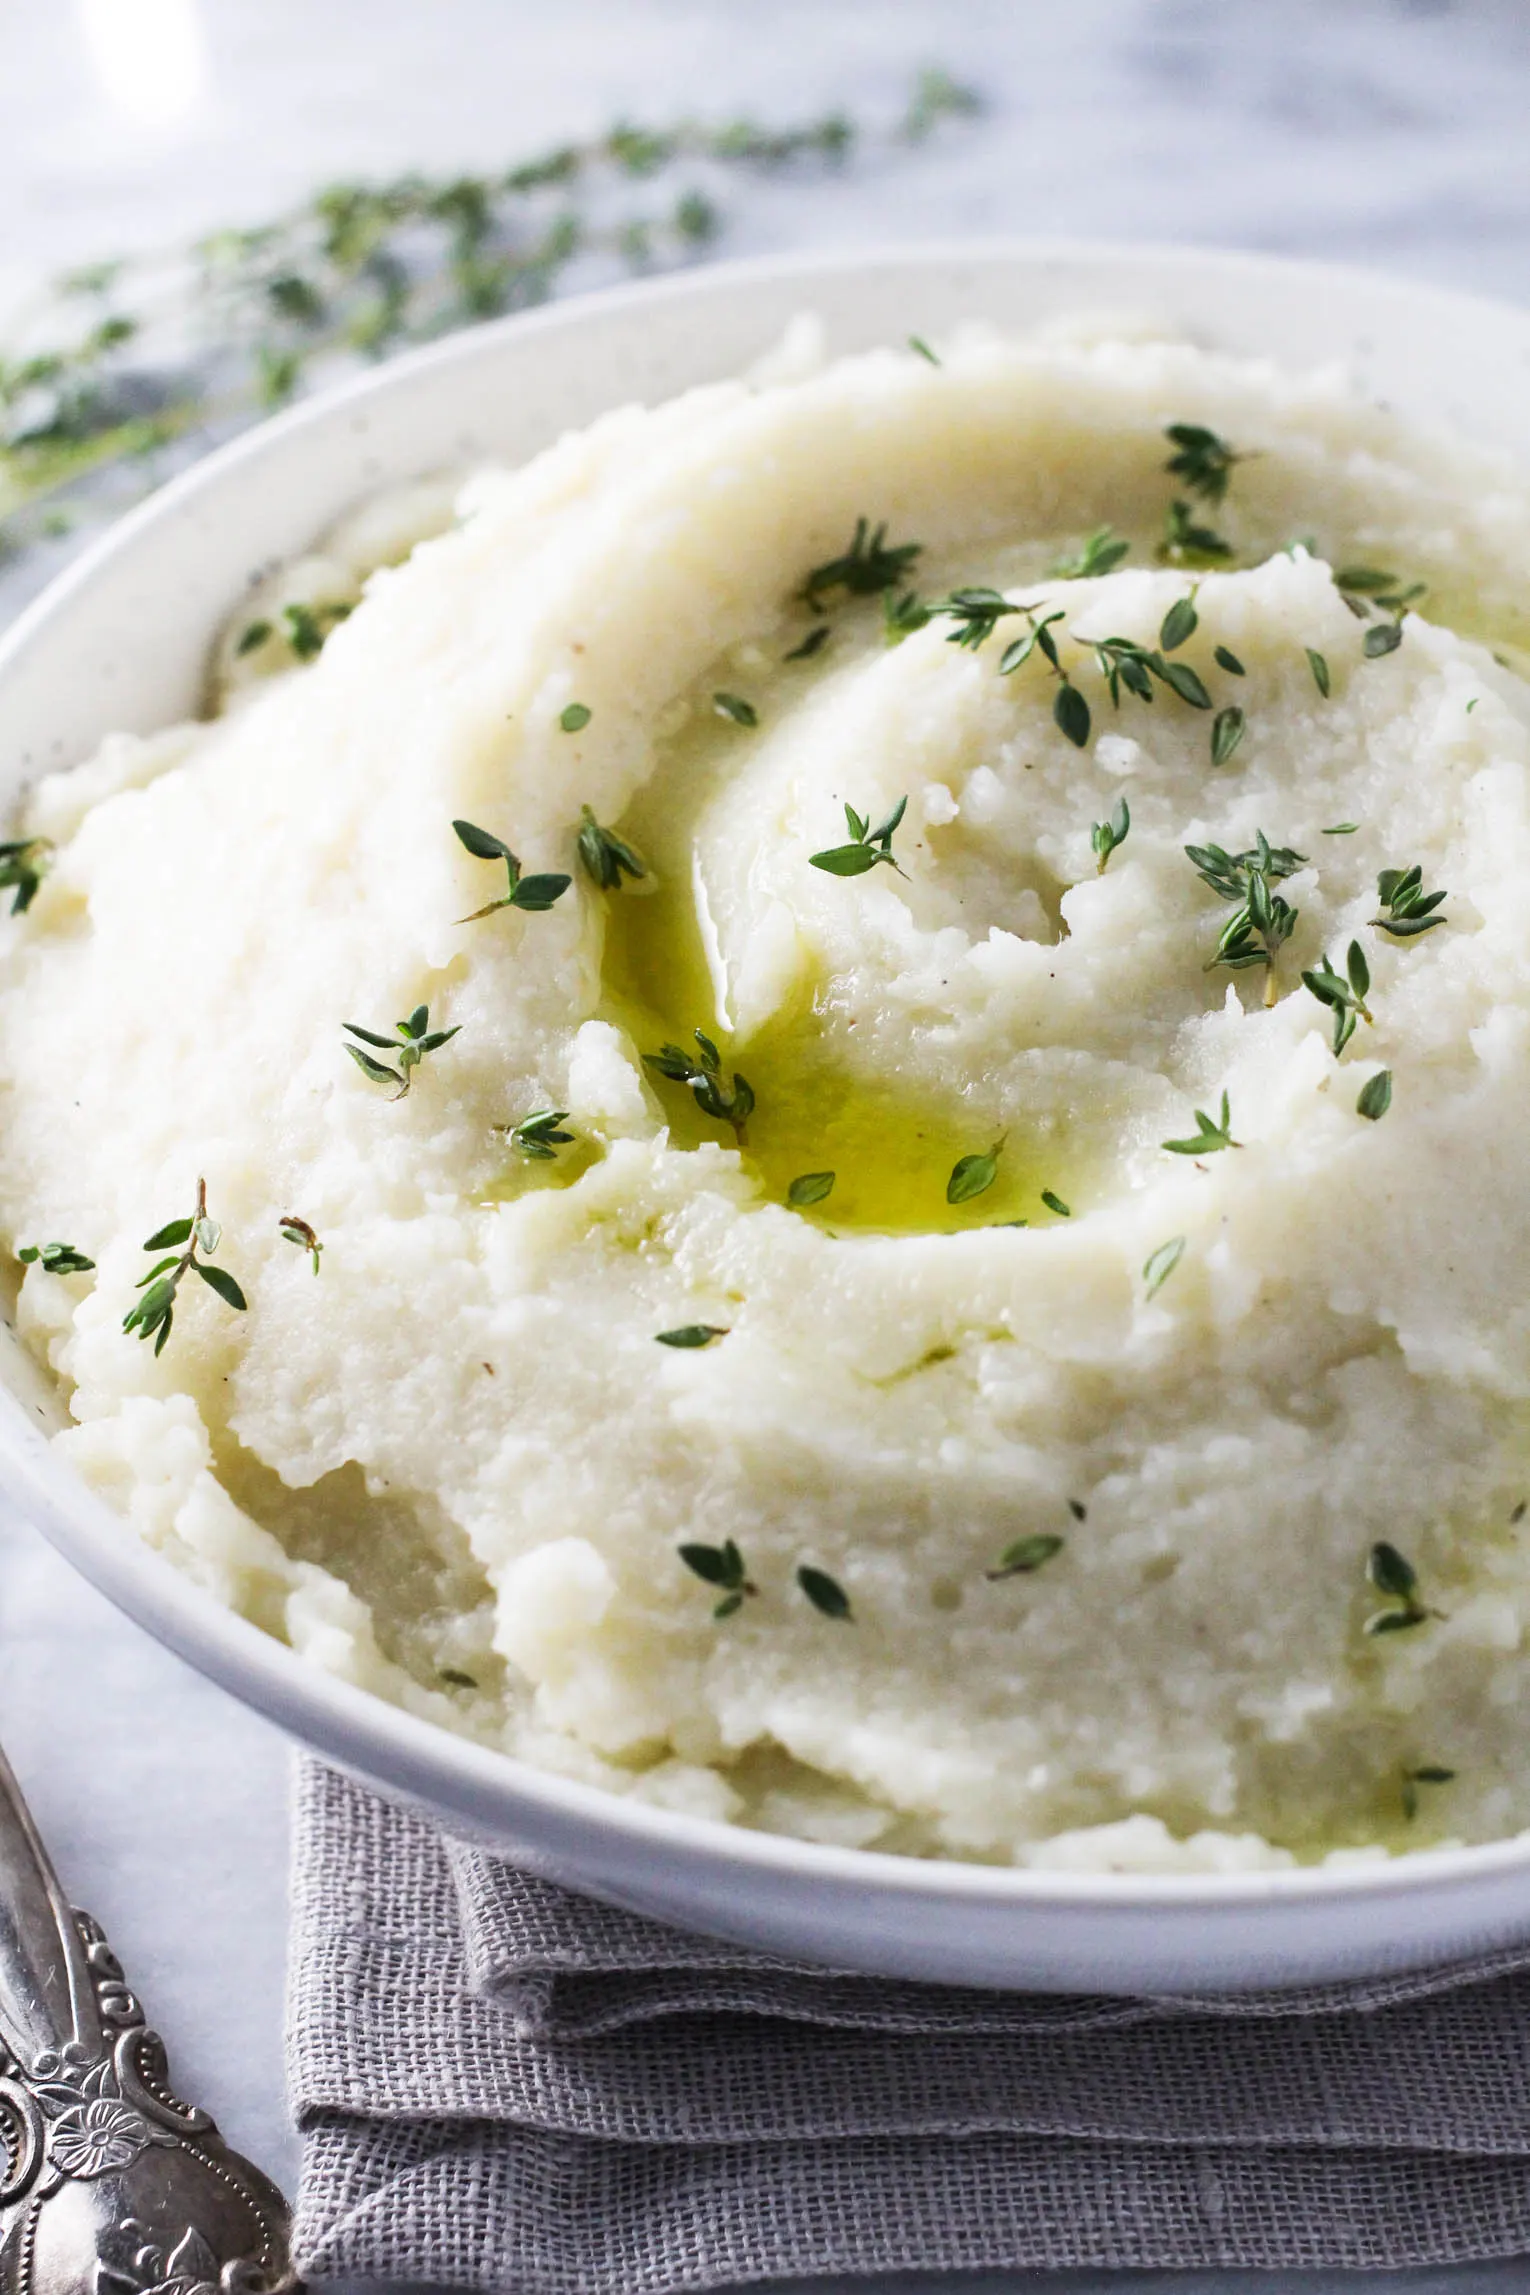 Potato and cauliflower mash in a bowl standing on a linen napkin. The mash is garnished with thyme leaves.